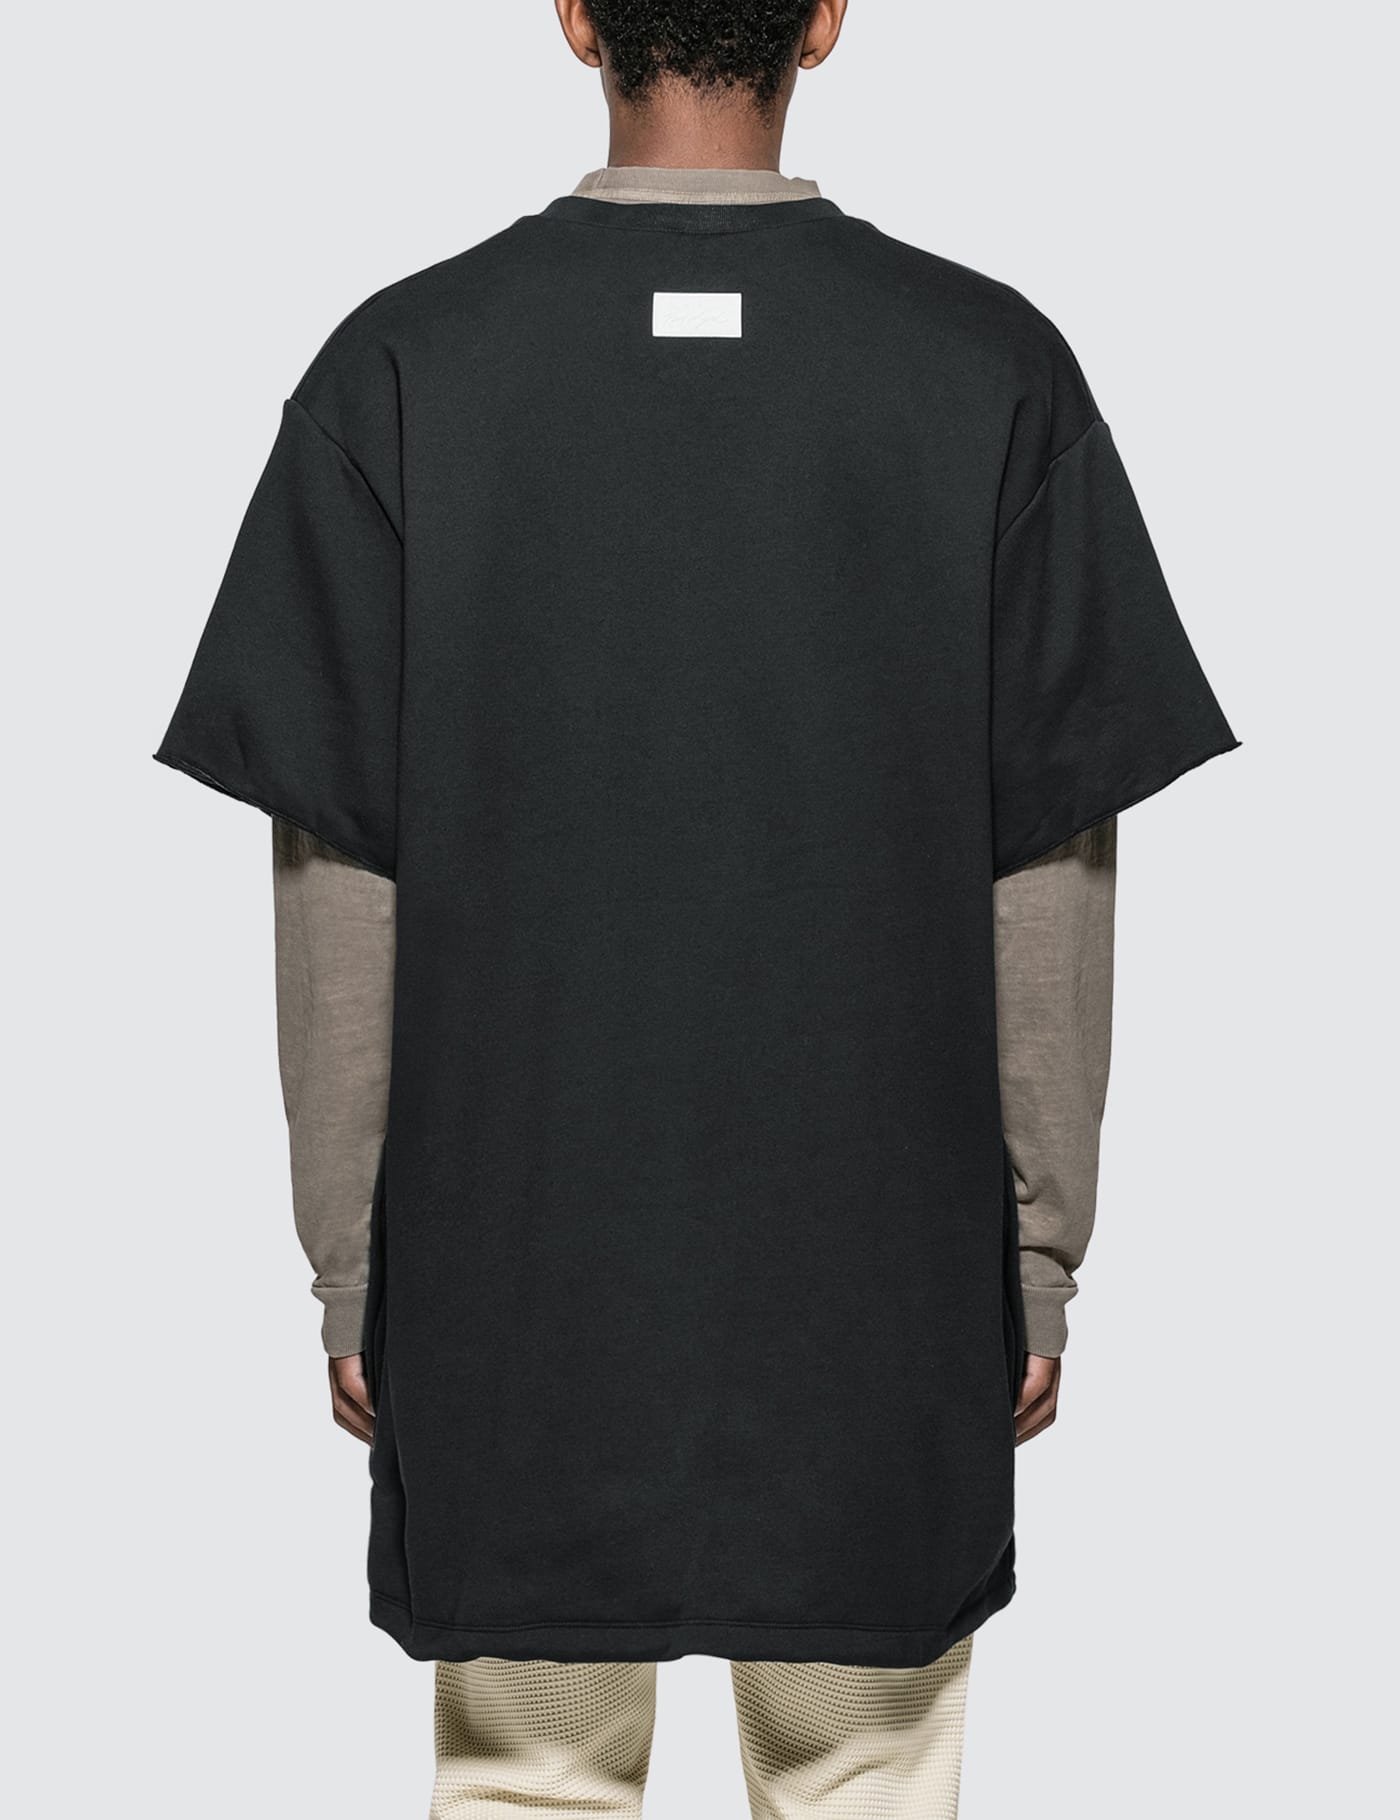 Nike - Fear Of God x Nike Warm Up Top | HBX - Globally Curated Fashion and  Lifestyle by Hypebeast